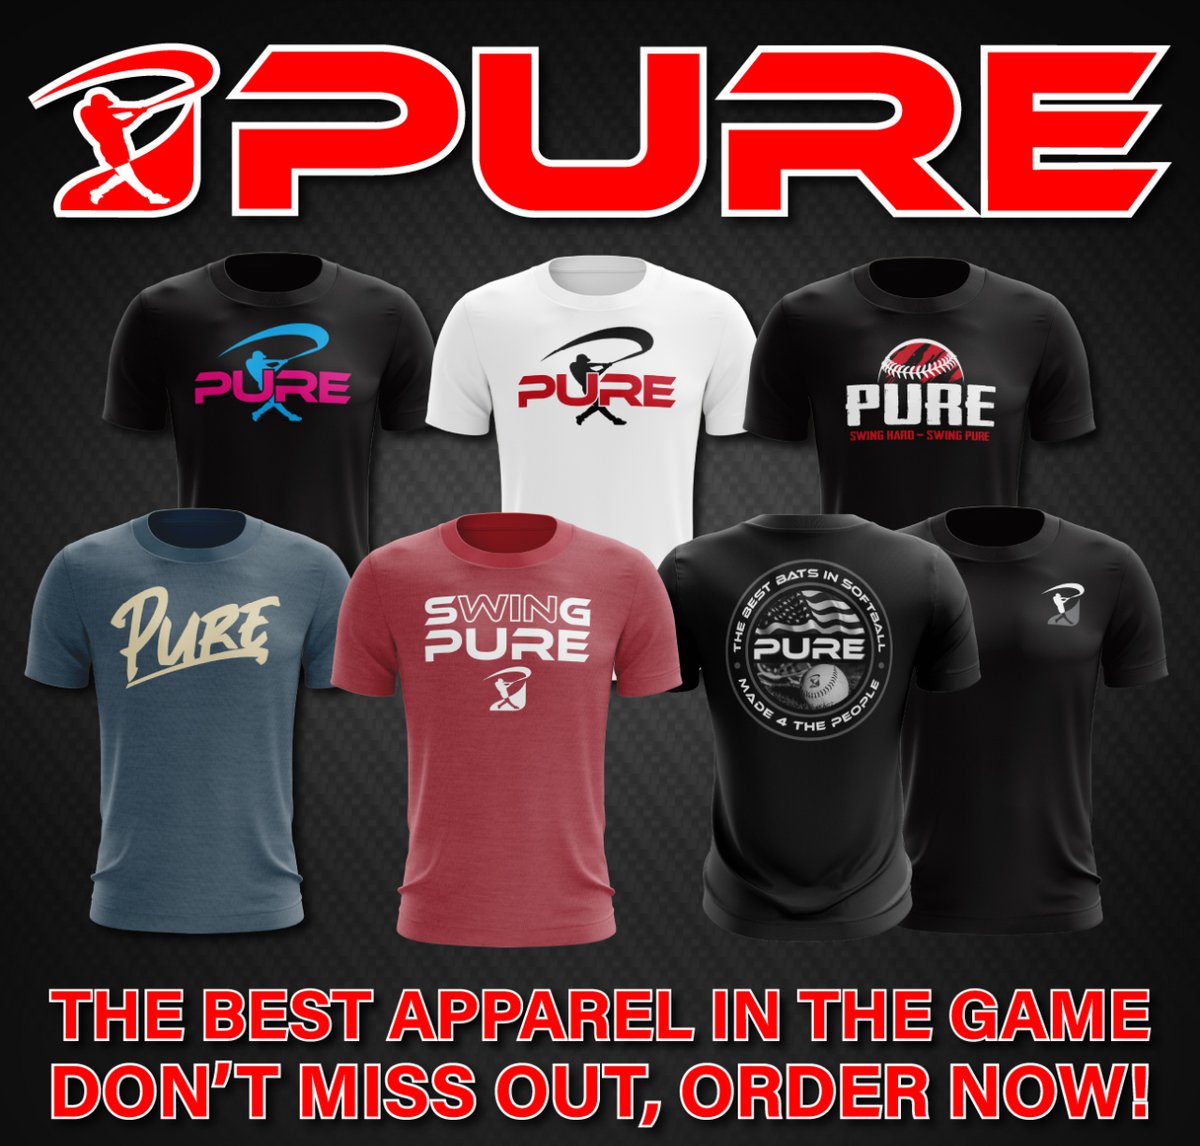 🎁 Gift Comfort, Gift Style! 🌟 Introducing Pure Sports Flex T-Shirts– the perfect blend of cotton, polyester, and 5% spandex. Ideal for on and off the field! 🏆  #slowpitch #pureis4thepeople #swingpure #softball #purefire 
Shop now: puresportstech.com/product-catego… 👕